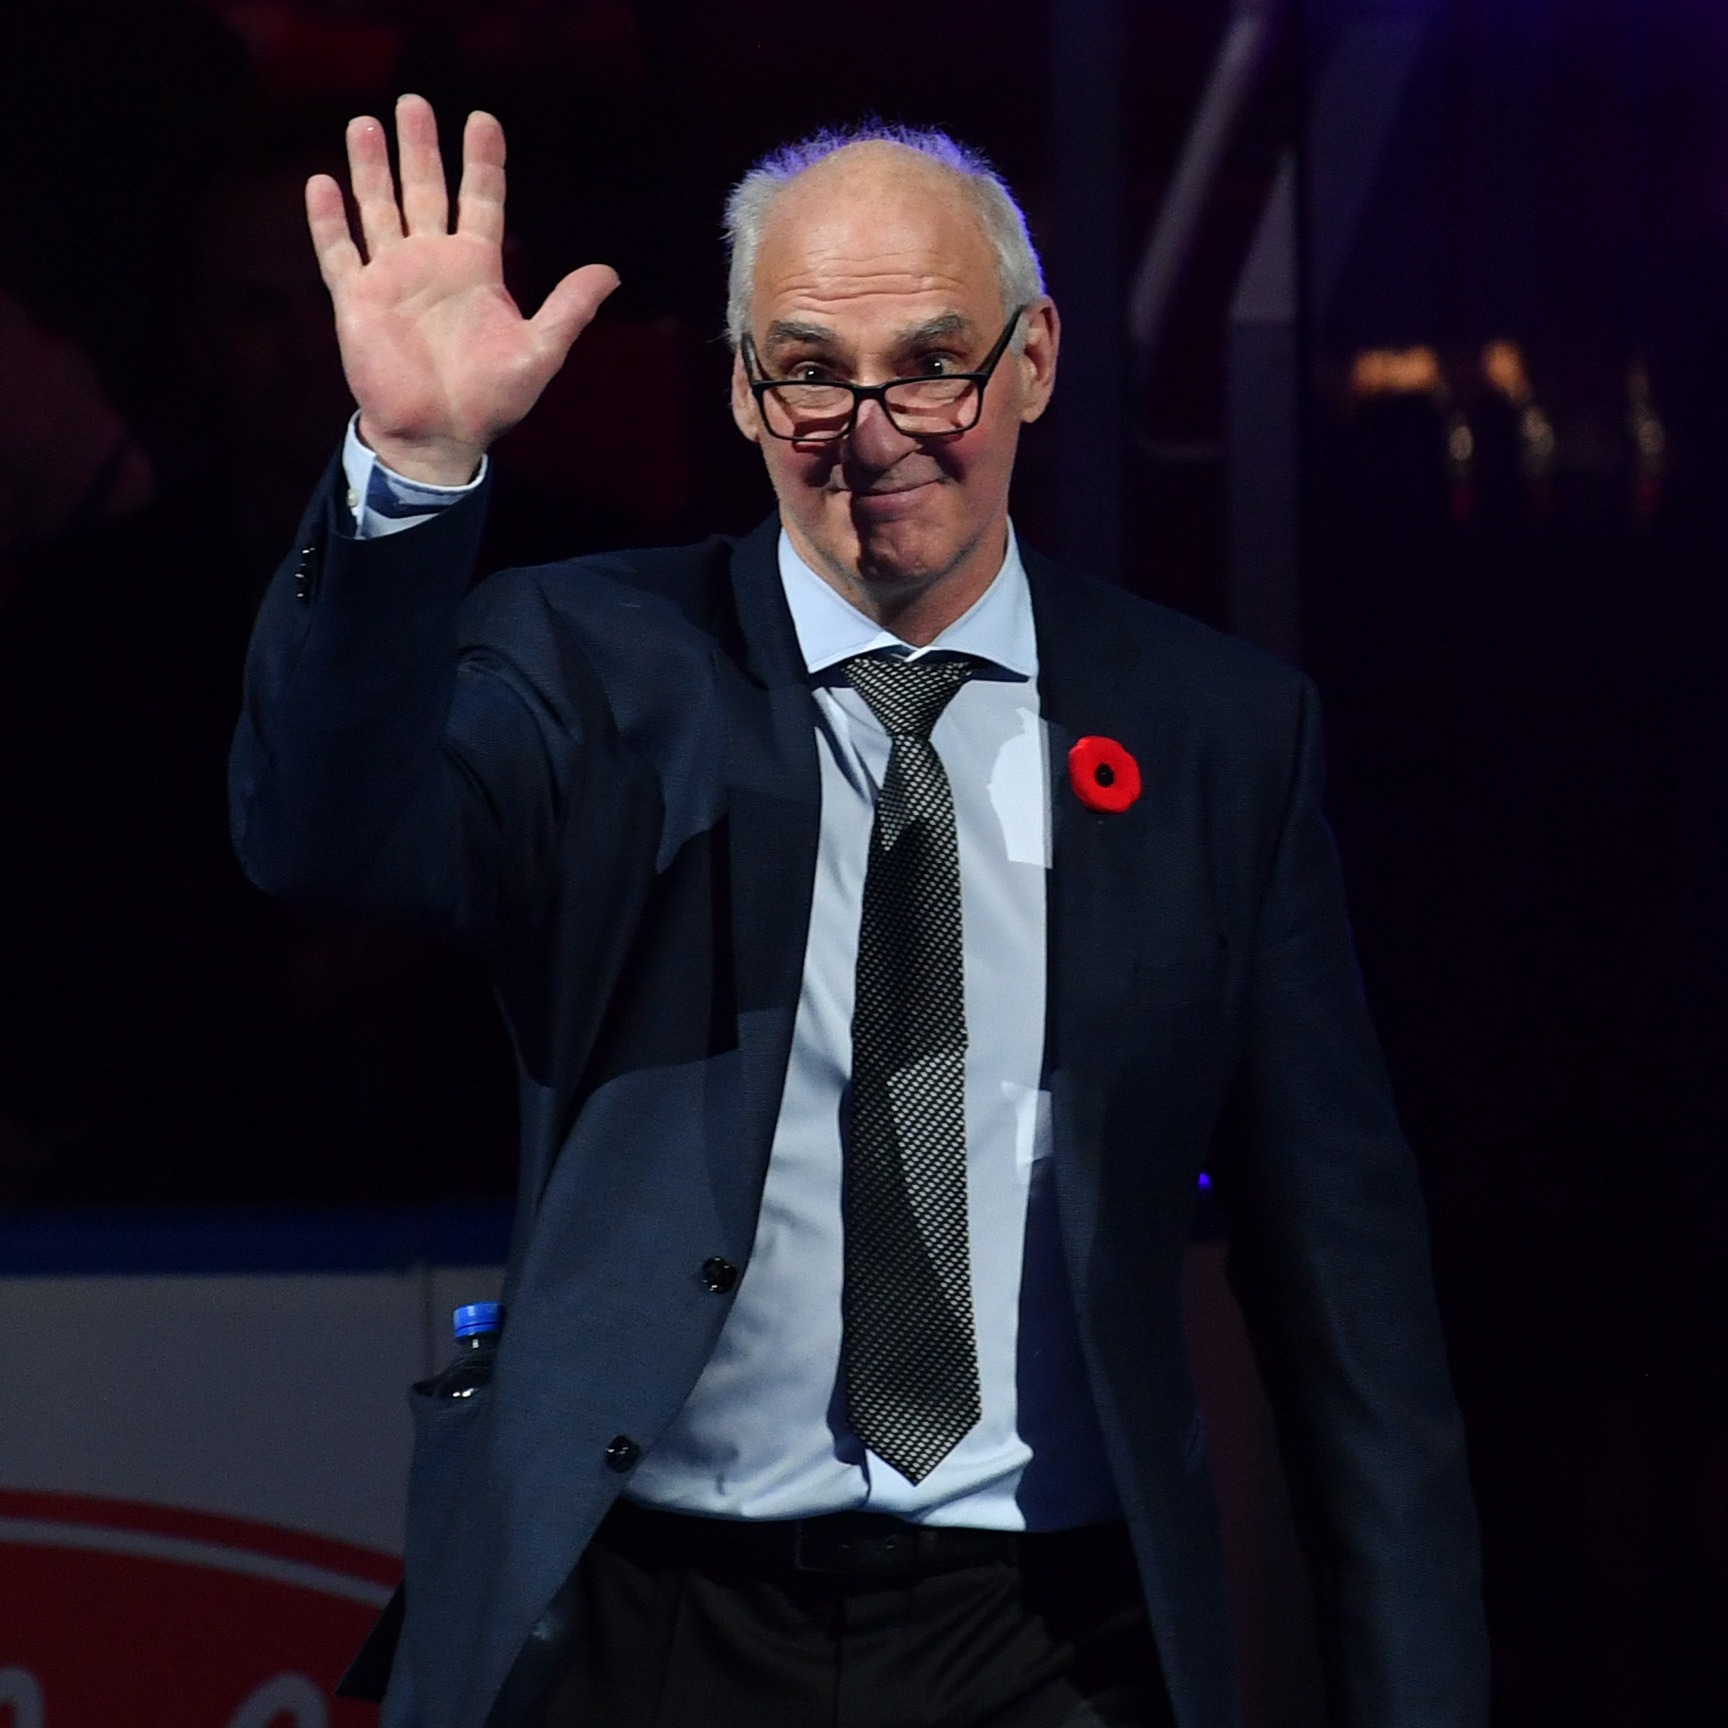 Edmonton Oilers - The inaugural #Oilers Hall of Fame induction